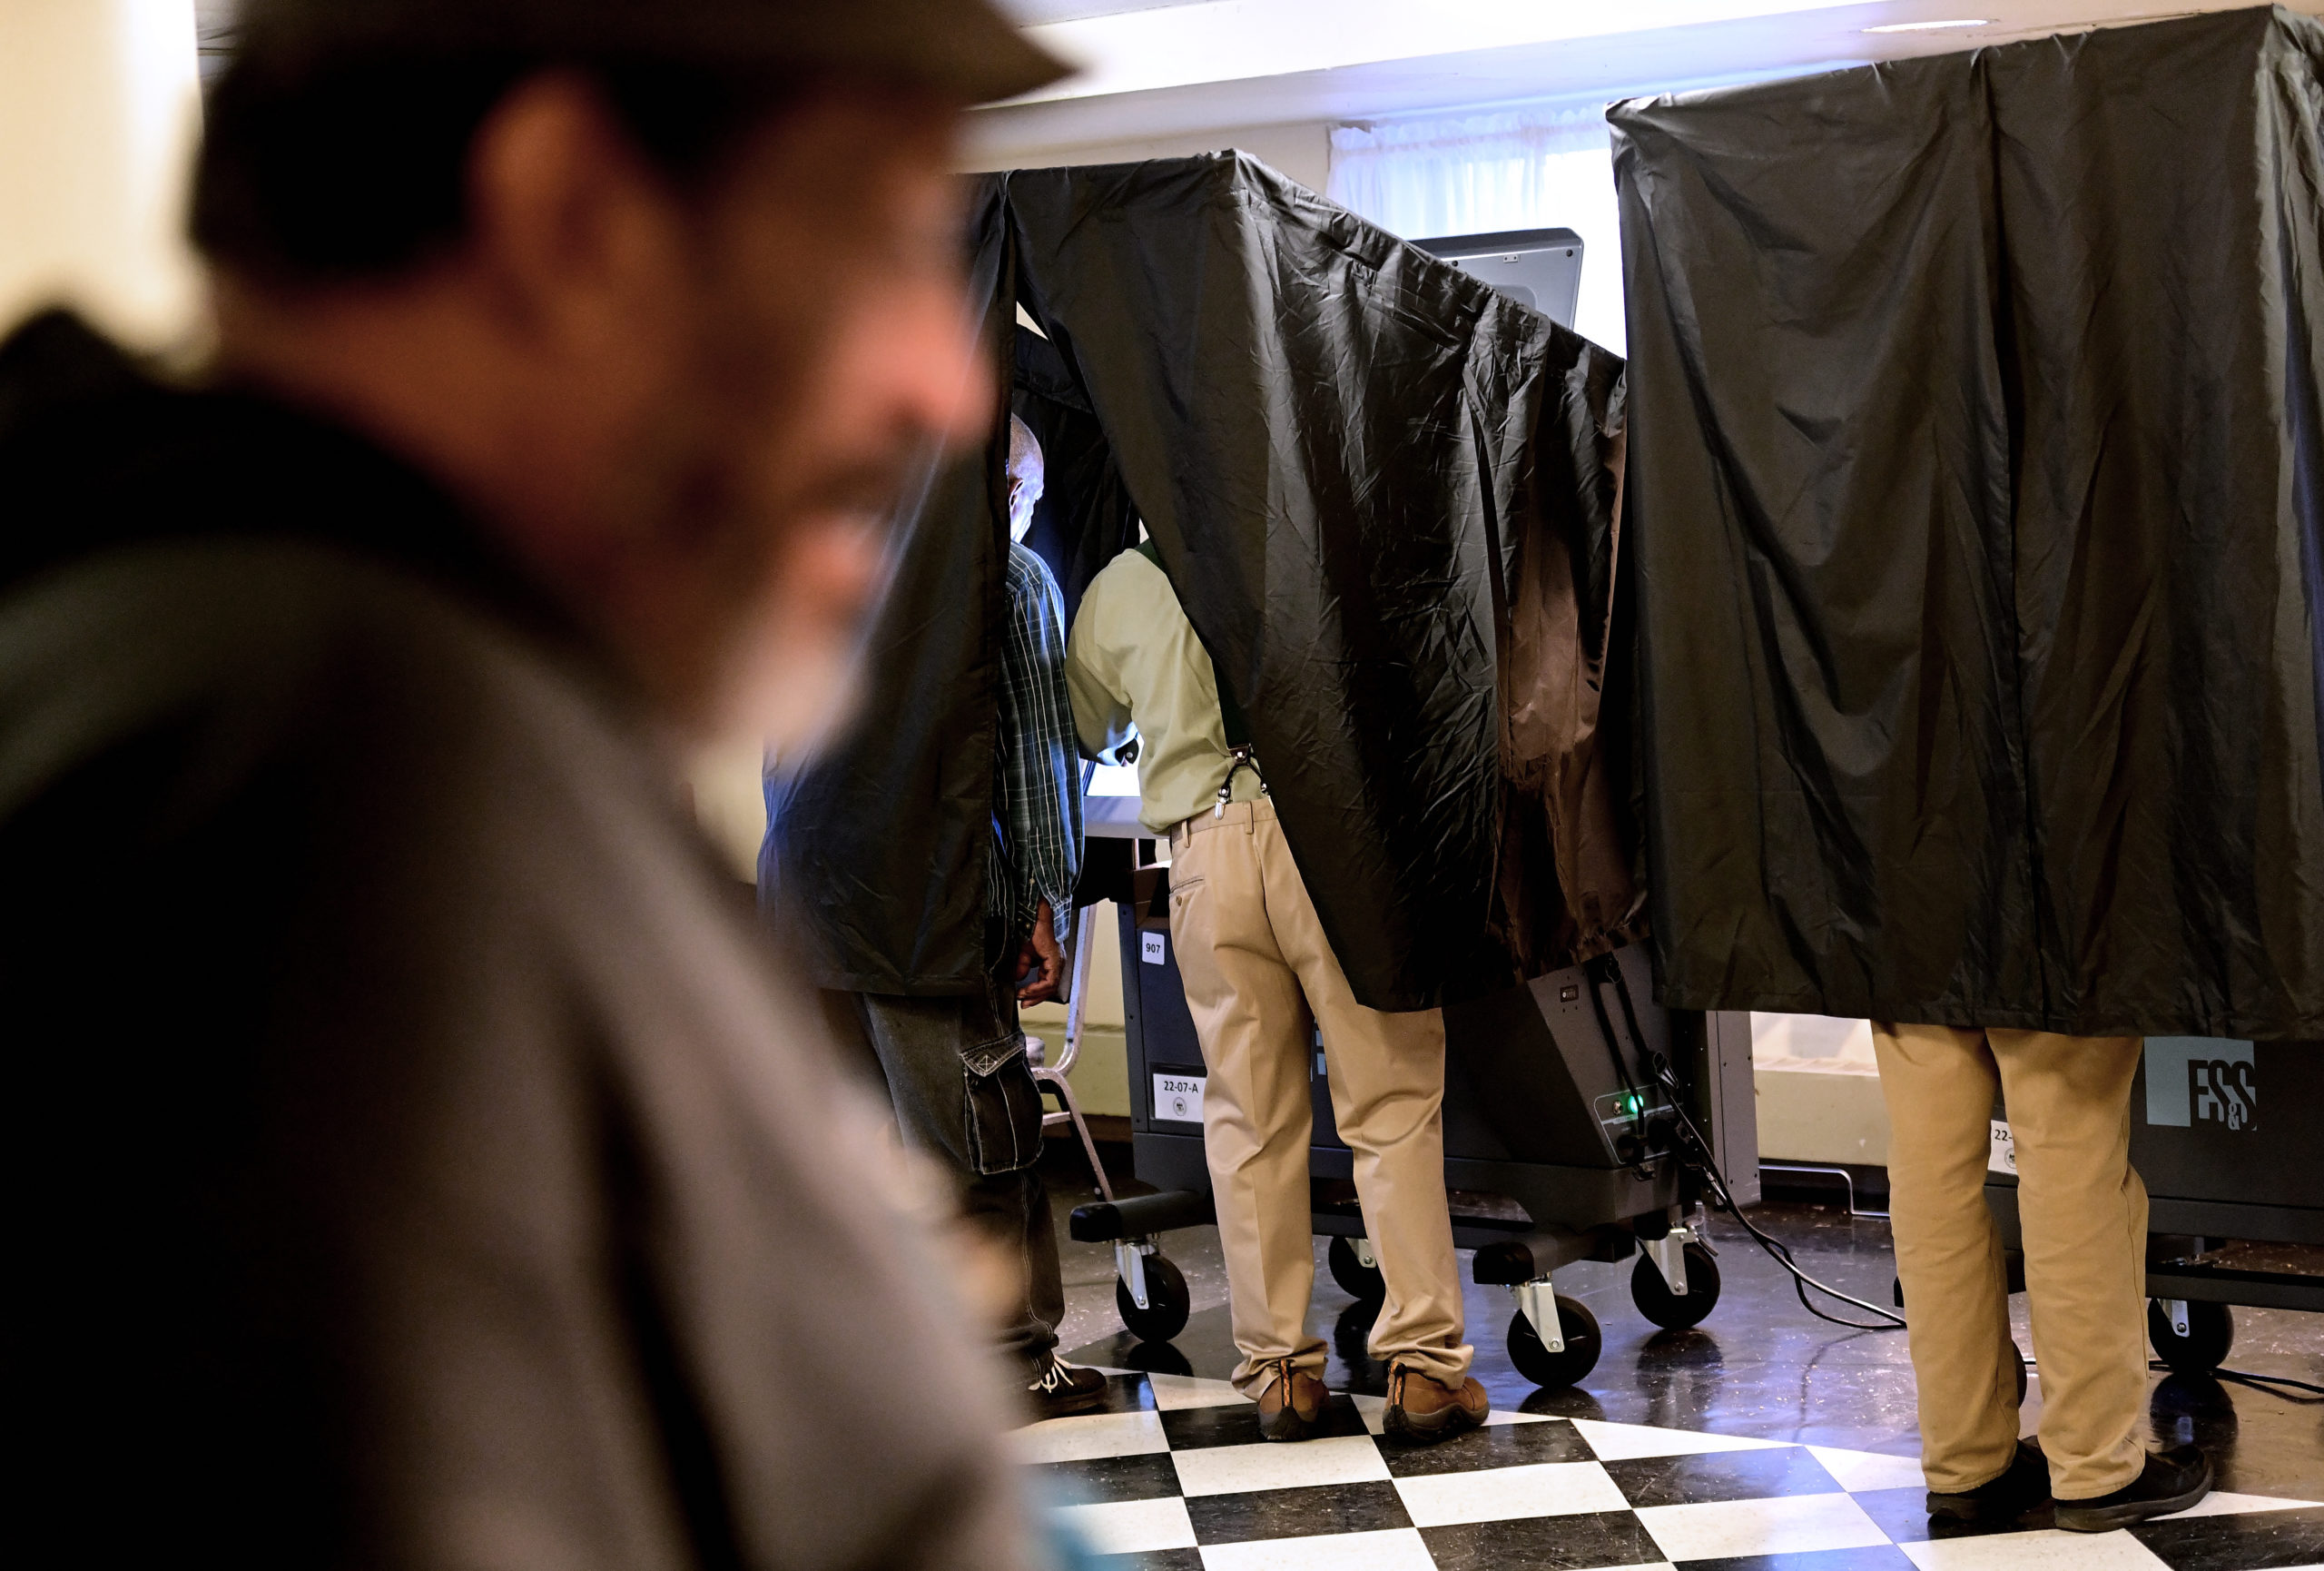 Voters cast their ballots at the Kendell Arms polling location on November 8, 2022 in Philadelphia, Pennsylvania.